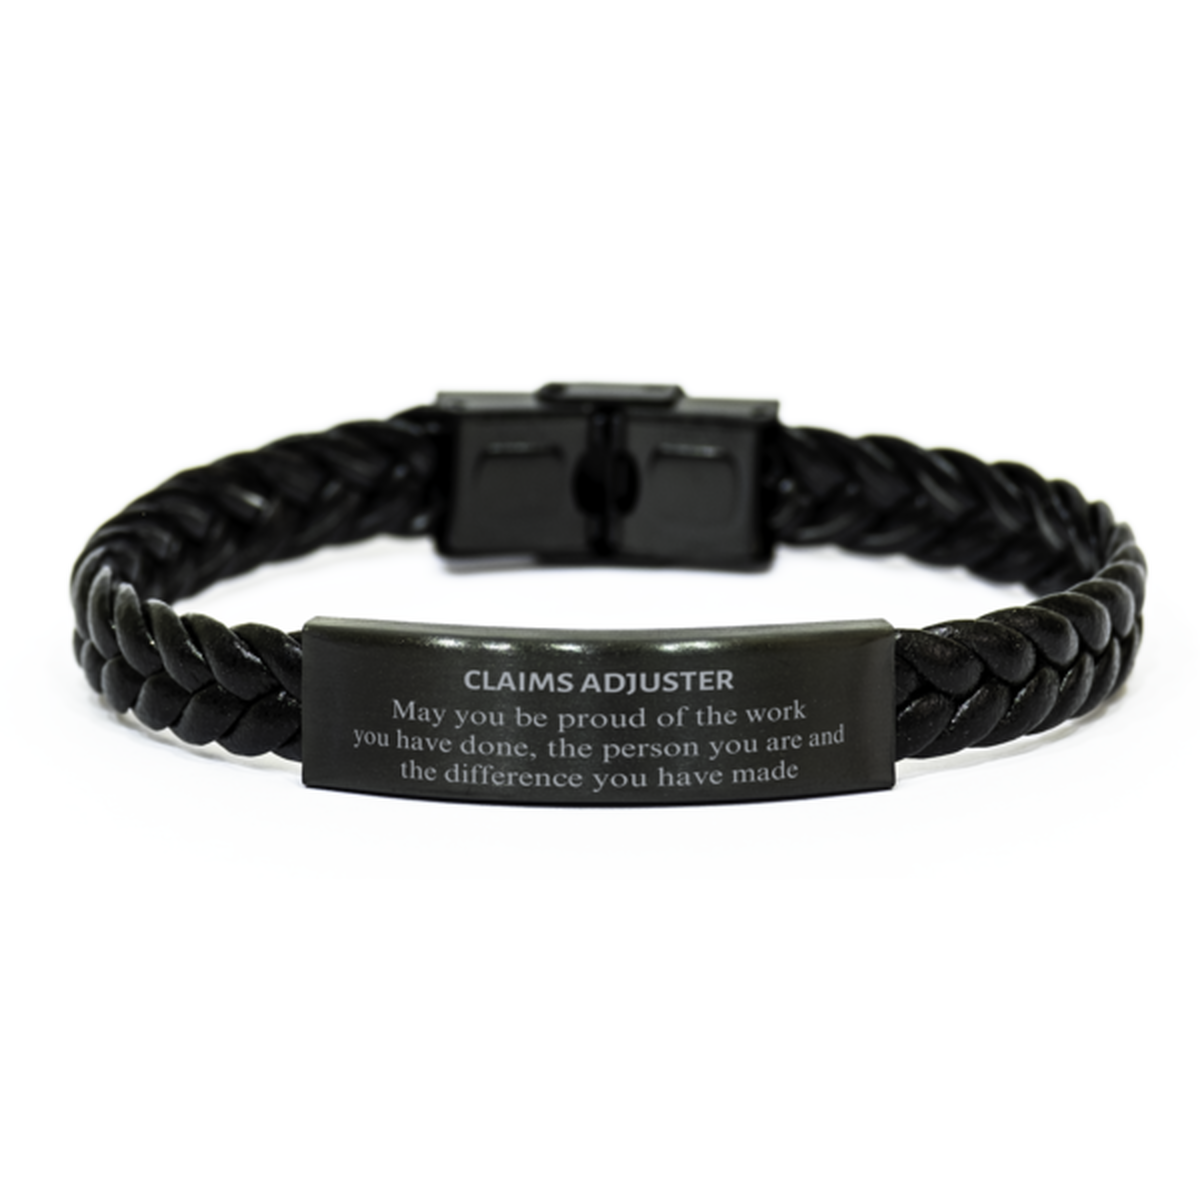 Claims Adjuster May you be proud of the work you have done, Retirement Claims Adjuster Braided Leather Bracelet for Colleague Appreciation Gifts Amazing for Claims Adjuster